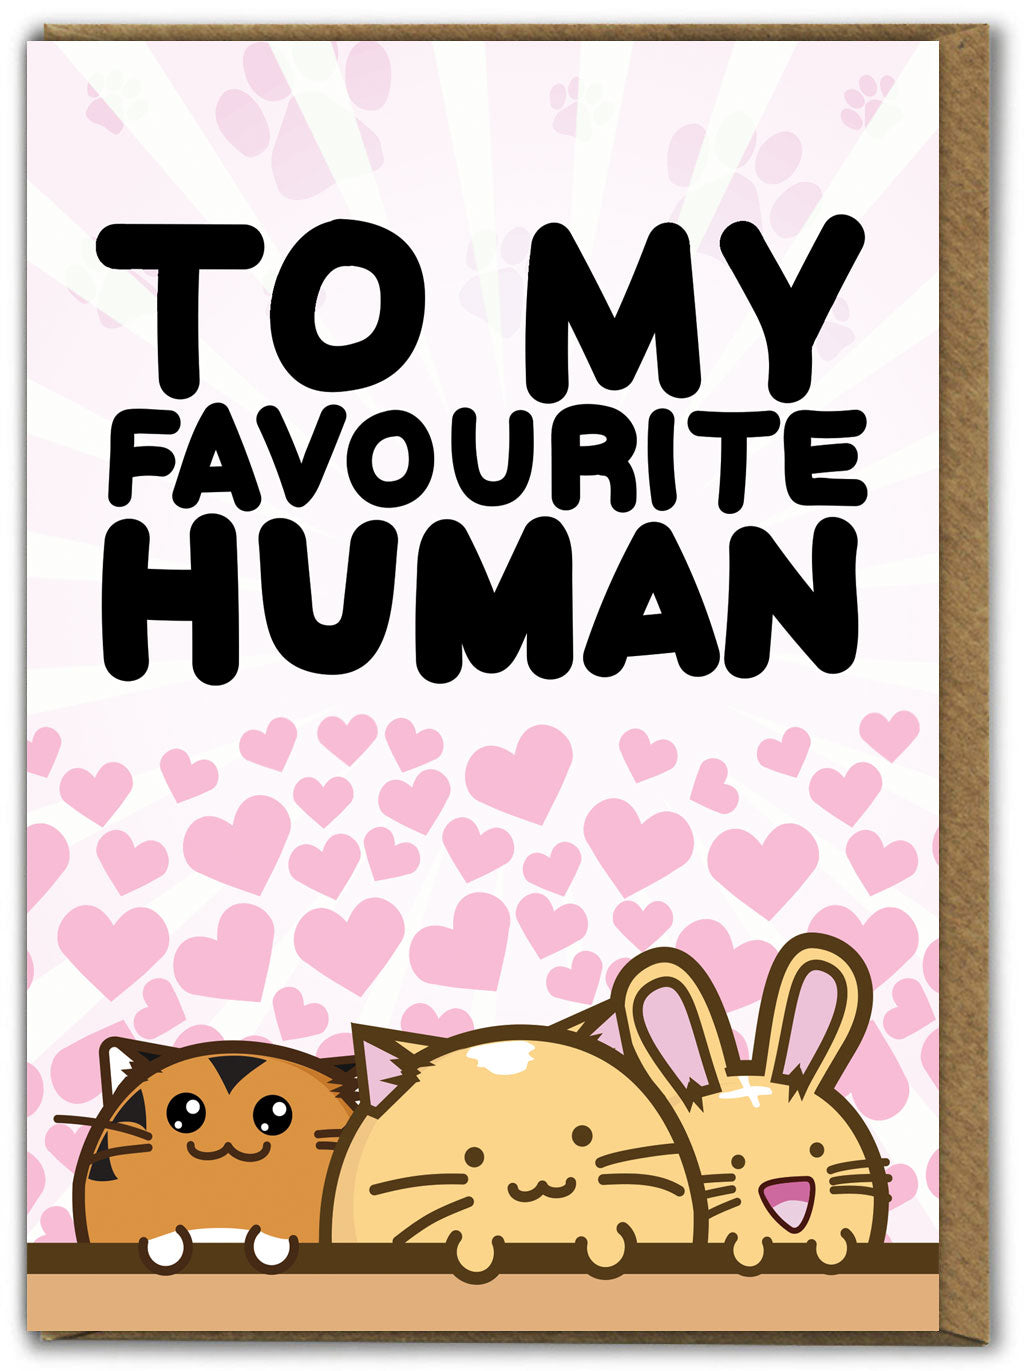 A greetings card with a white background and light pink sunrays at the top behind big black words in capitals 'to my favourite human'. The illustration below is of very cute animals in a kawaii style - two cats and a rabbit. They are surrounded by light pink hearts.